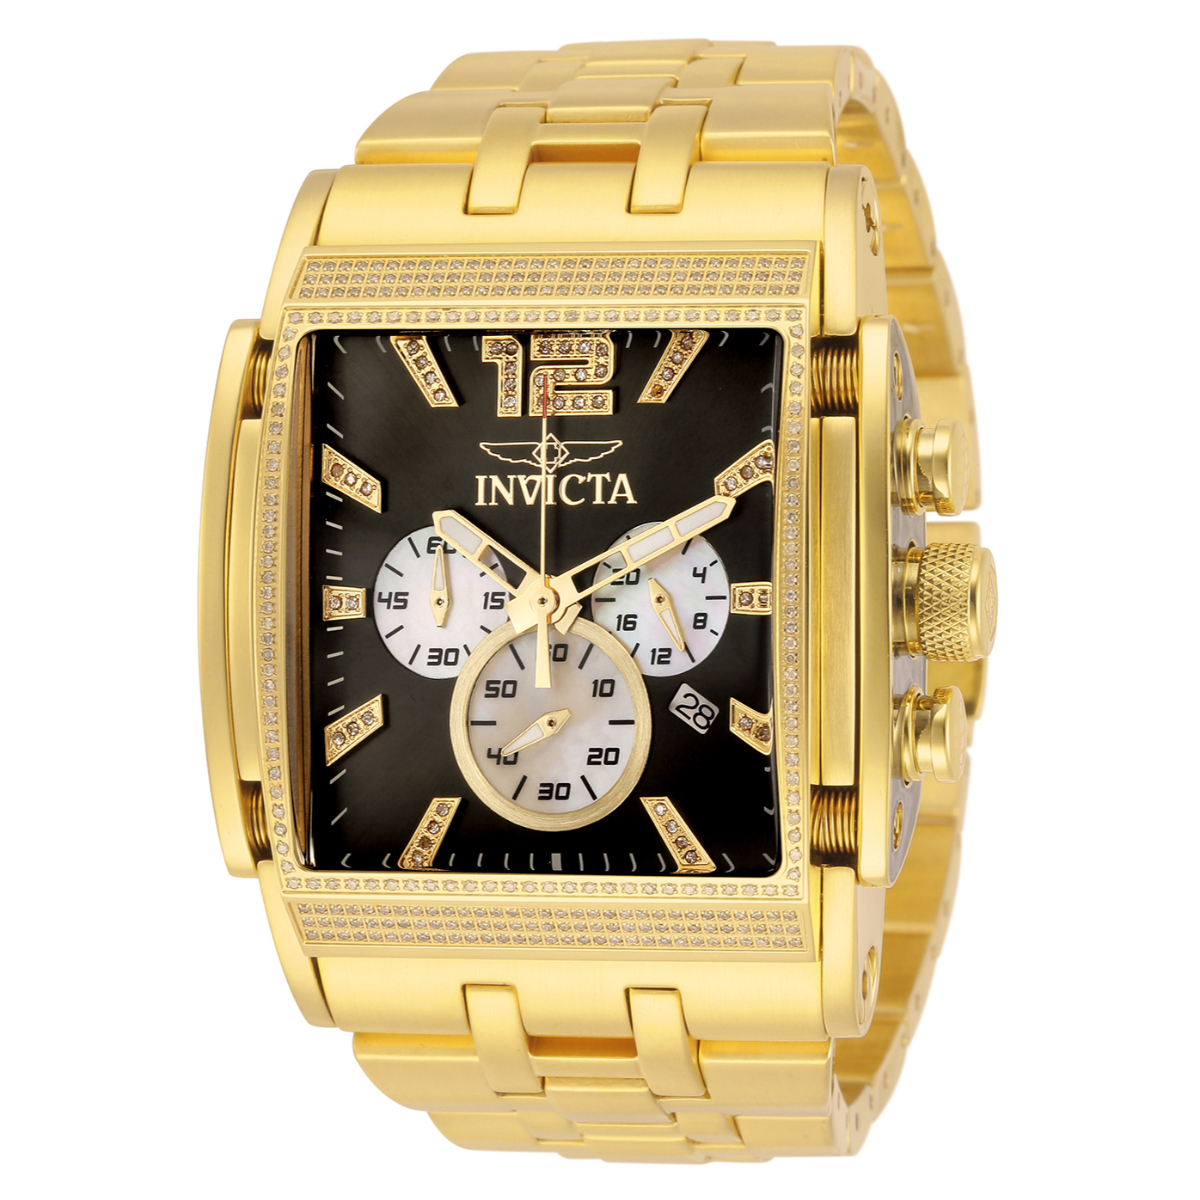 Invicta Speedway 1.23 Carat Diamond Men's Watch w/ Metal & Mother of Pearl Dial - 47mm, Gold (32542)